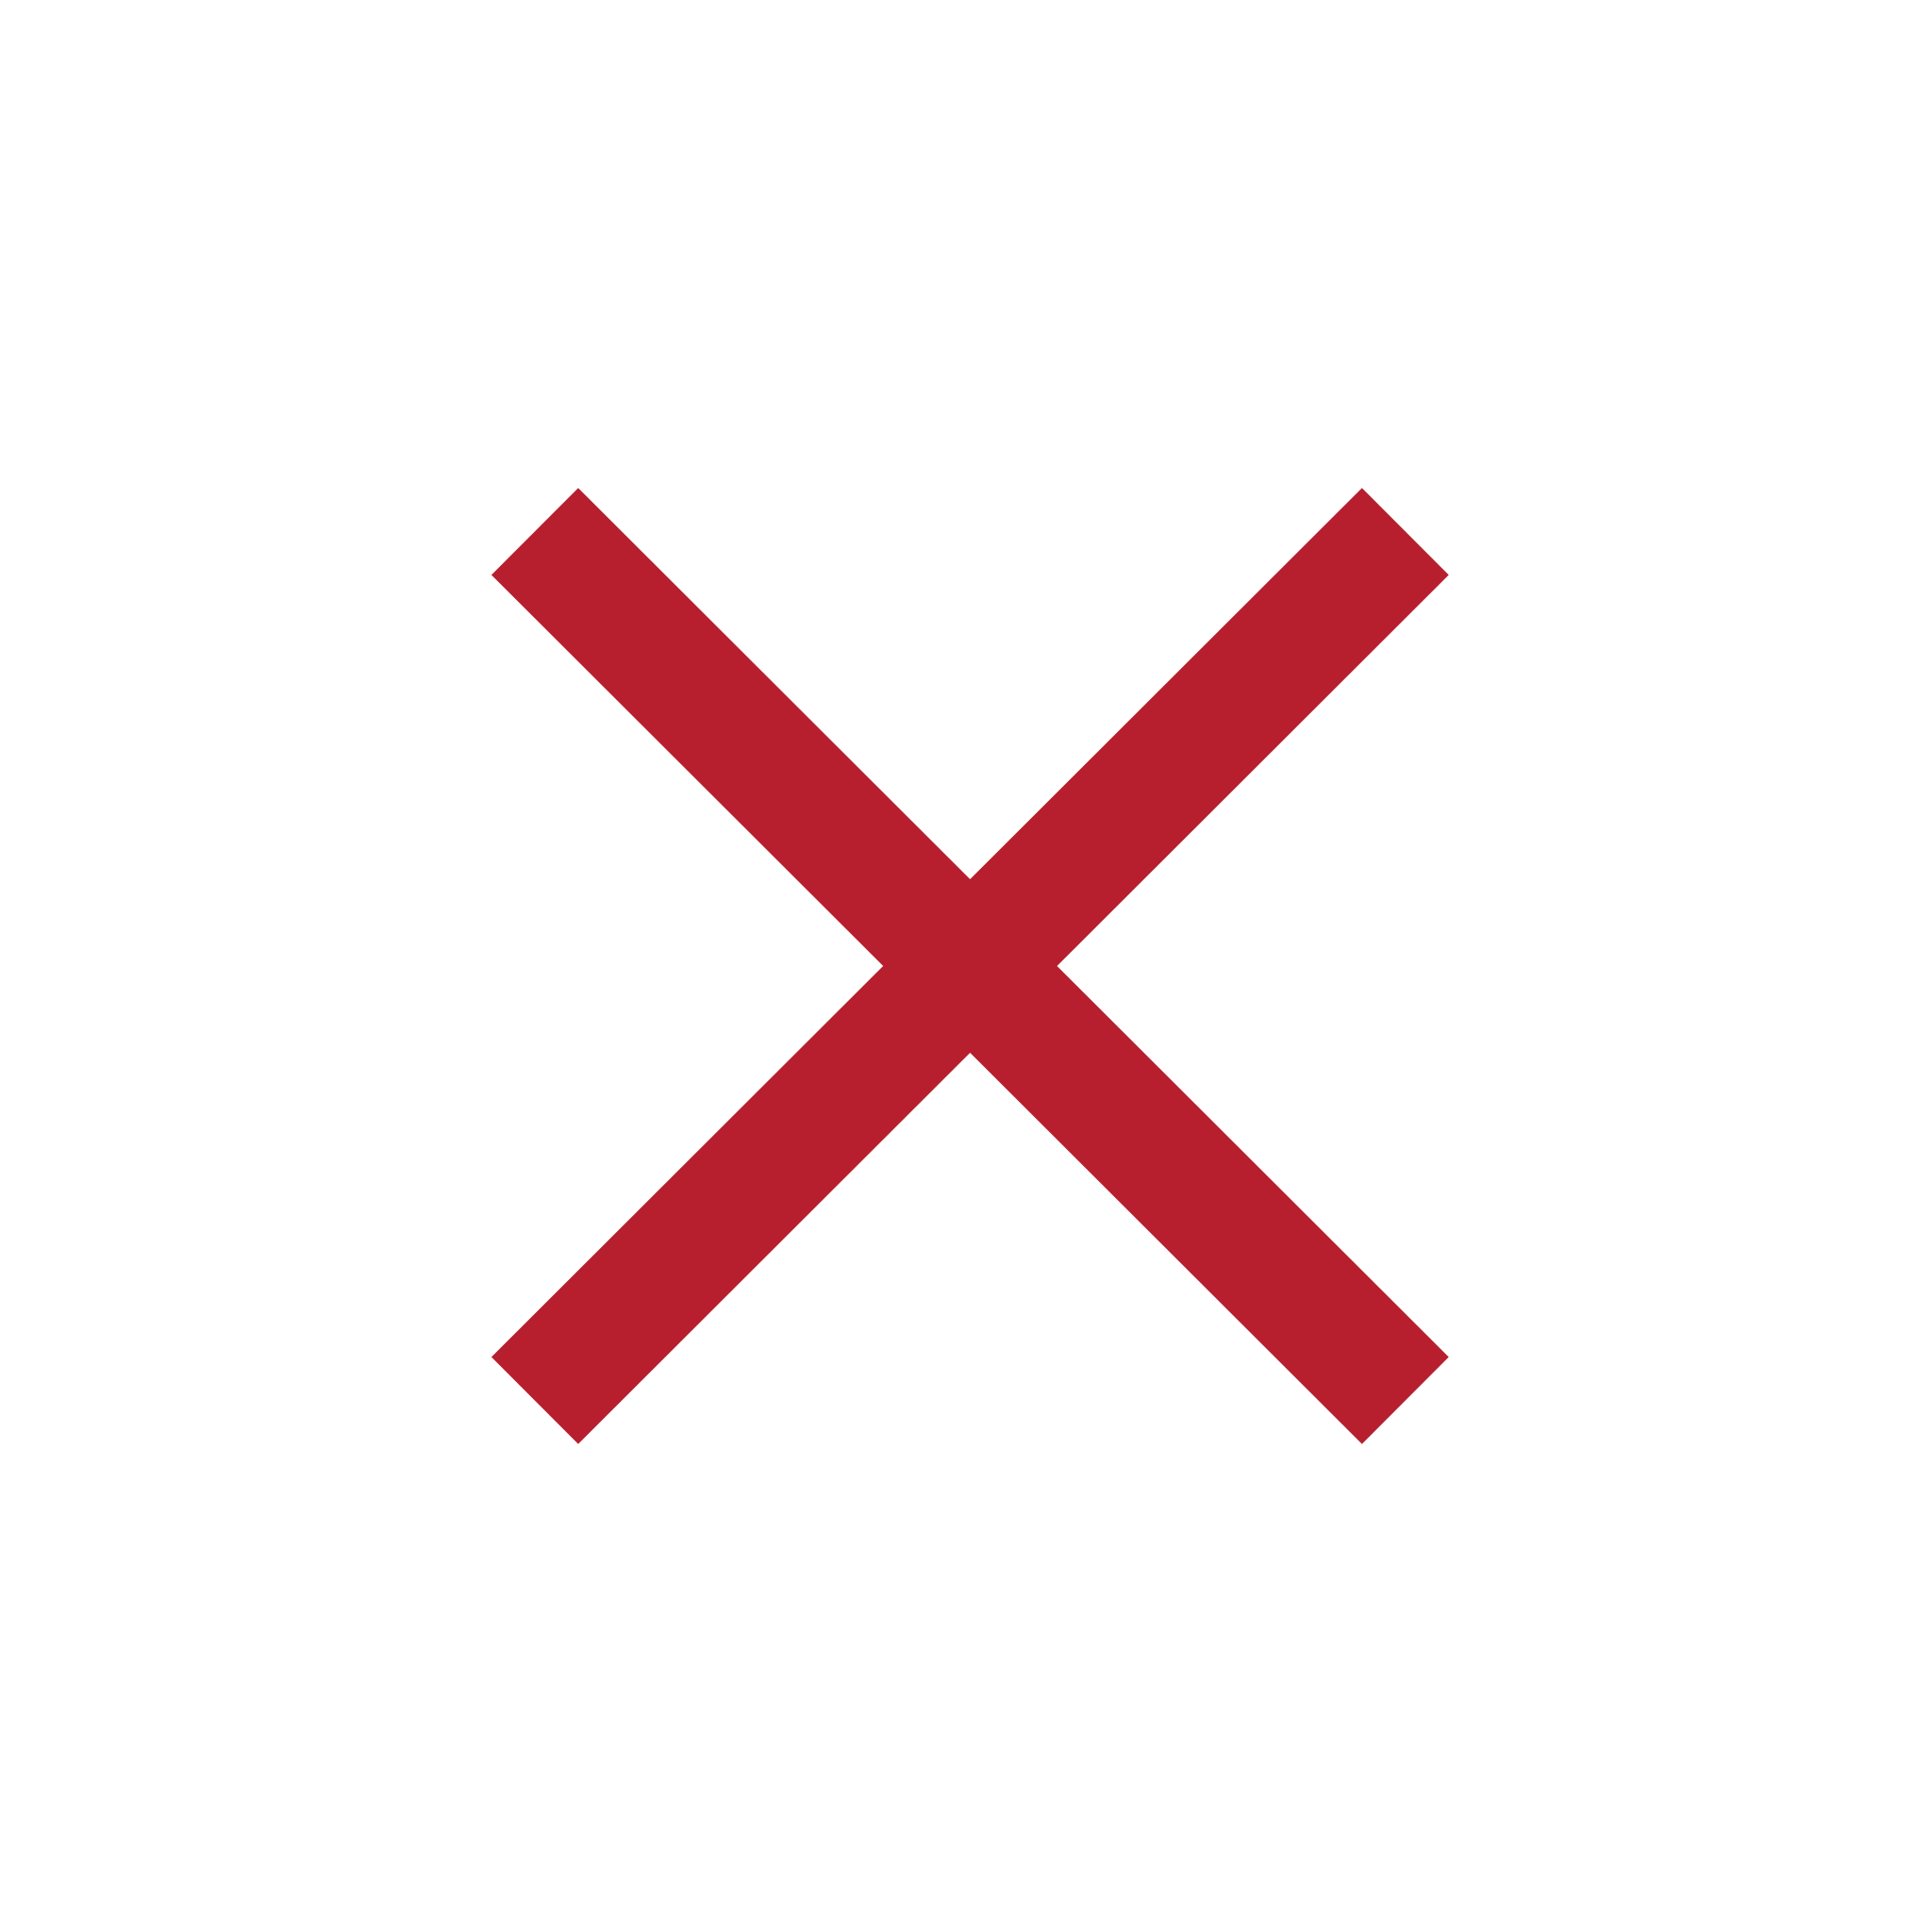 File:ISO 7001 - Red Cross.svg - Wikipedia